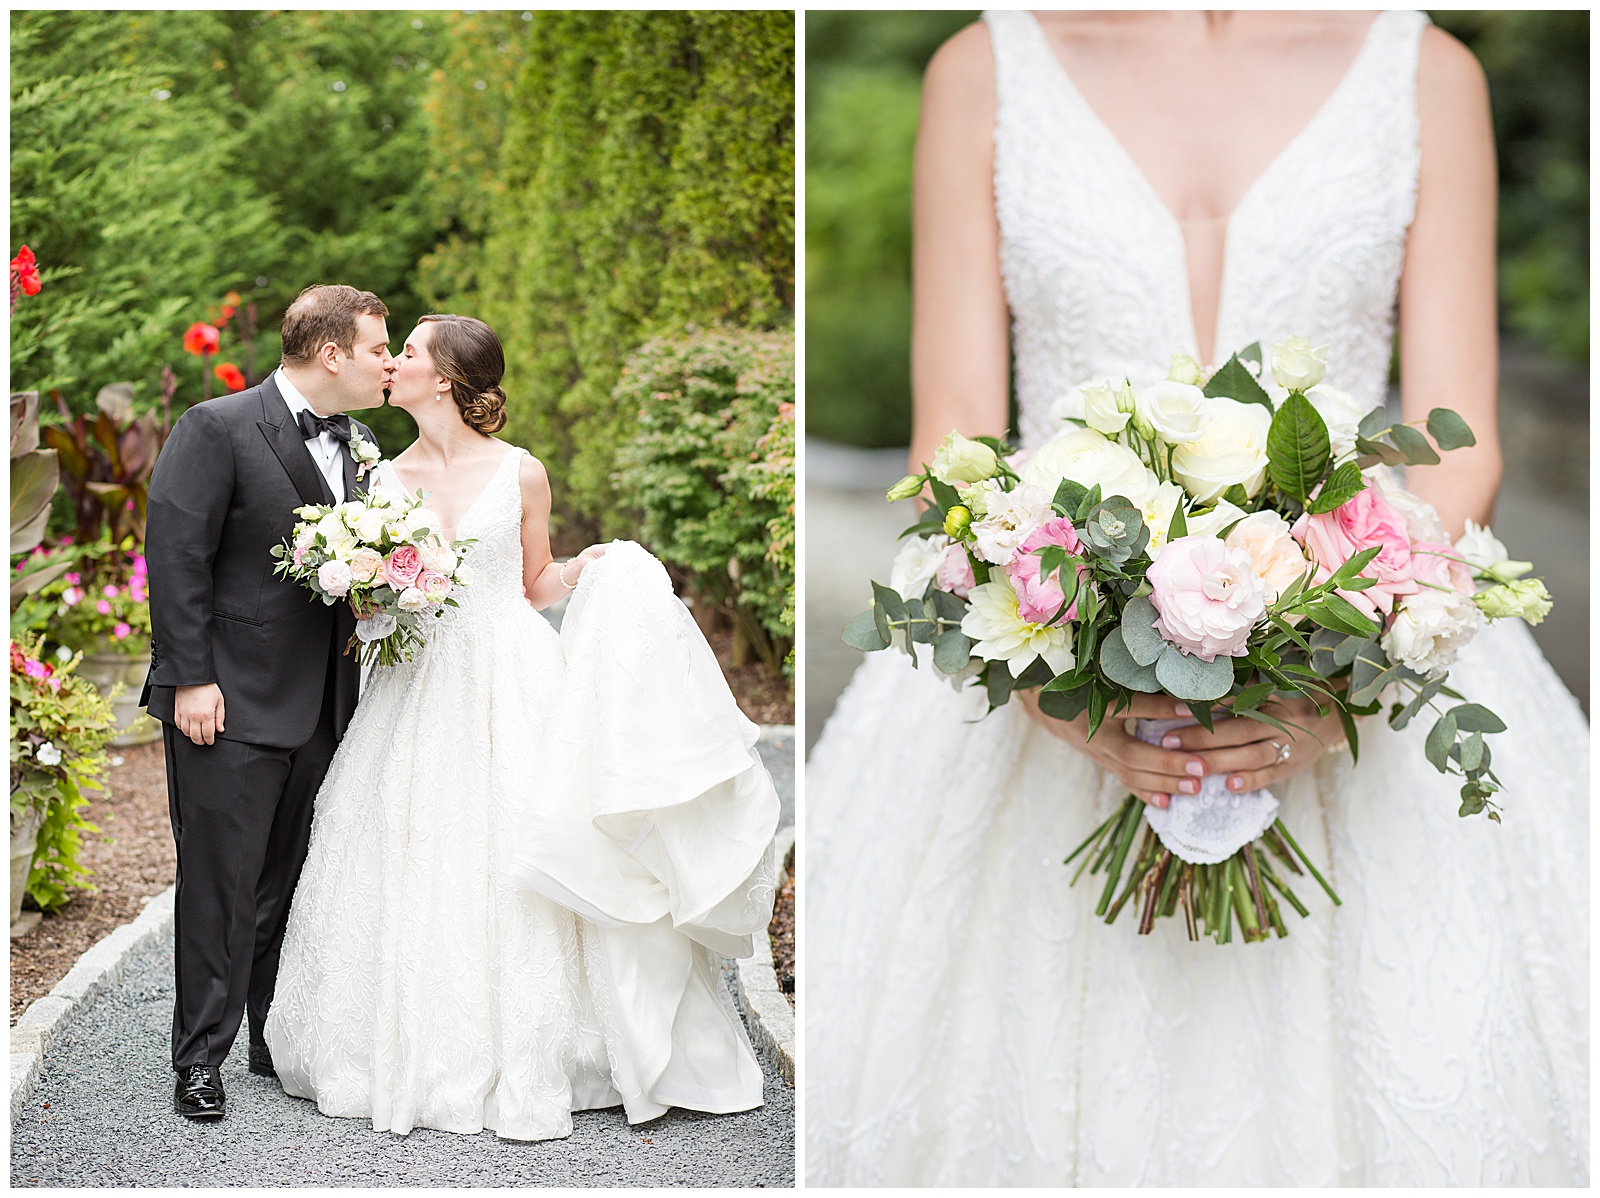 Studio 539 wedding bouquet images during a first look